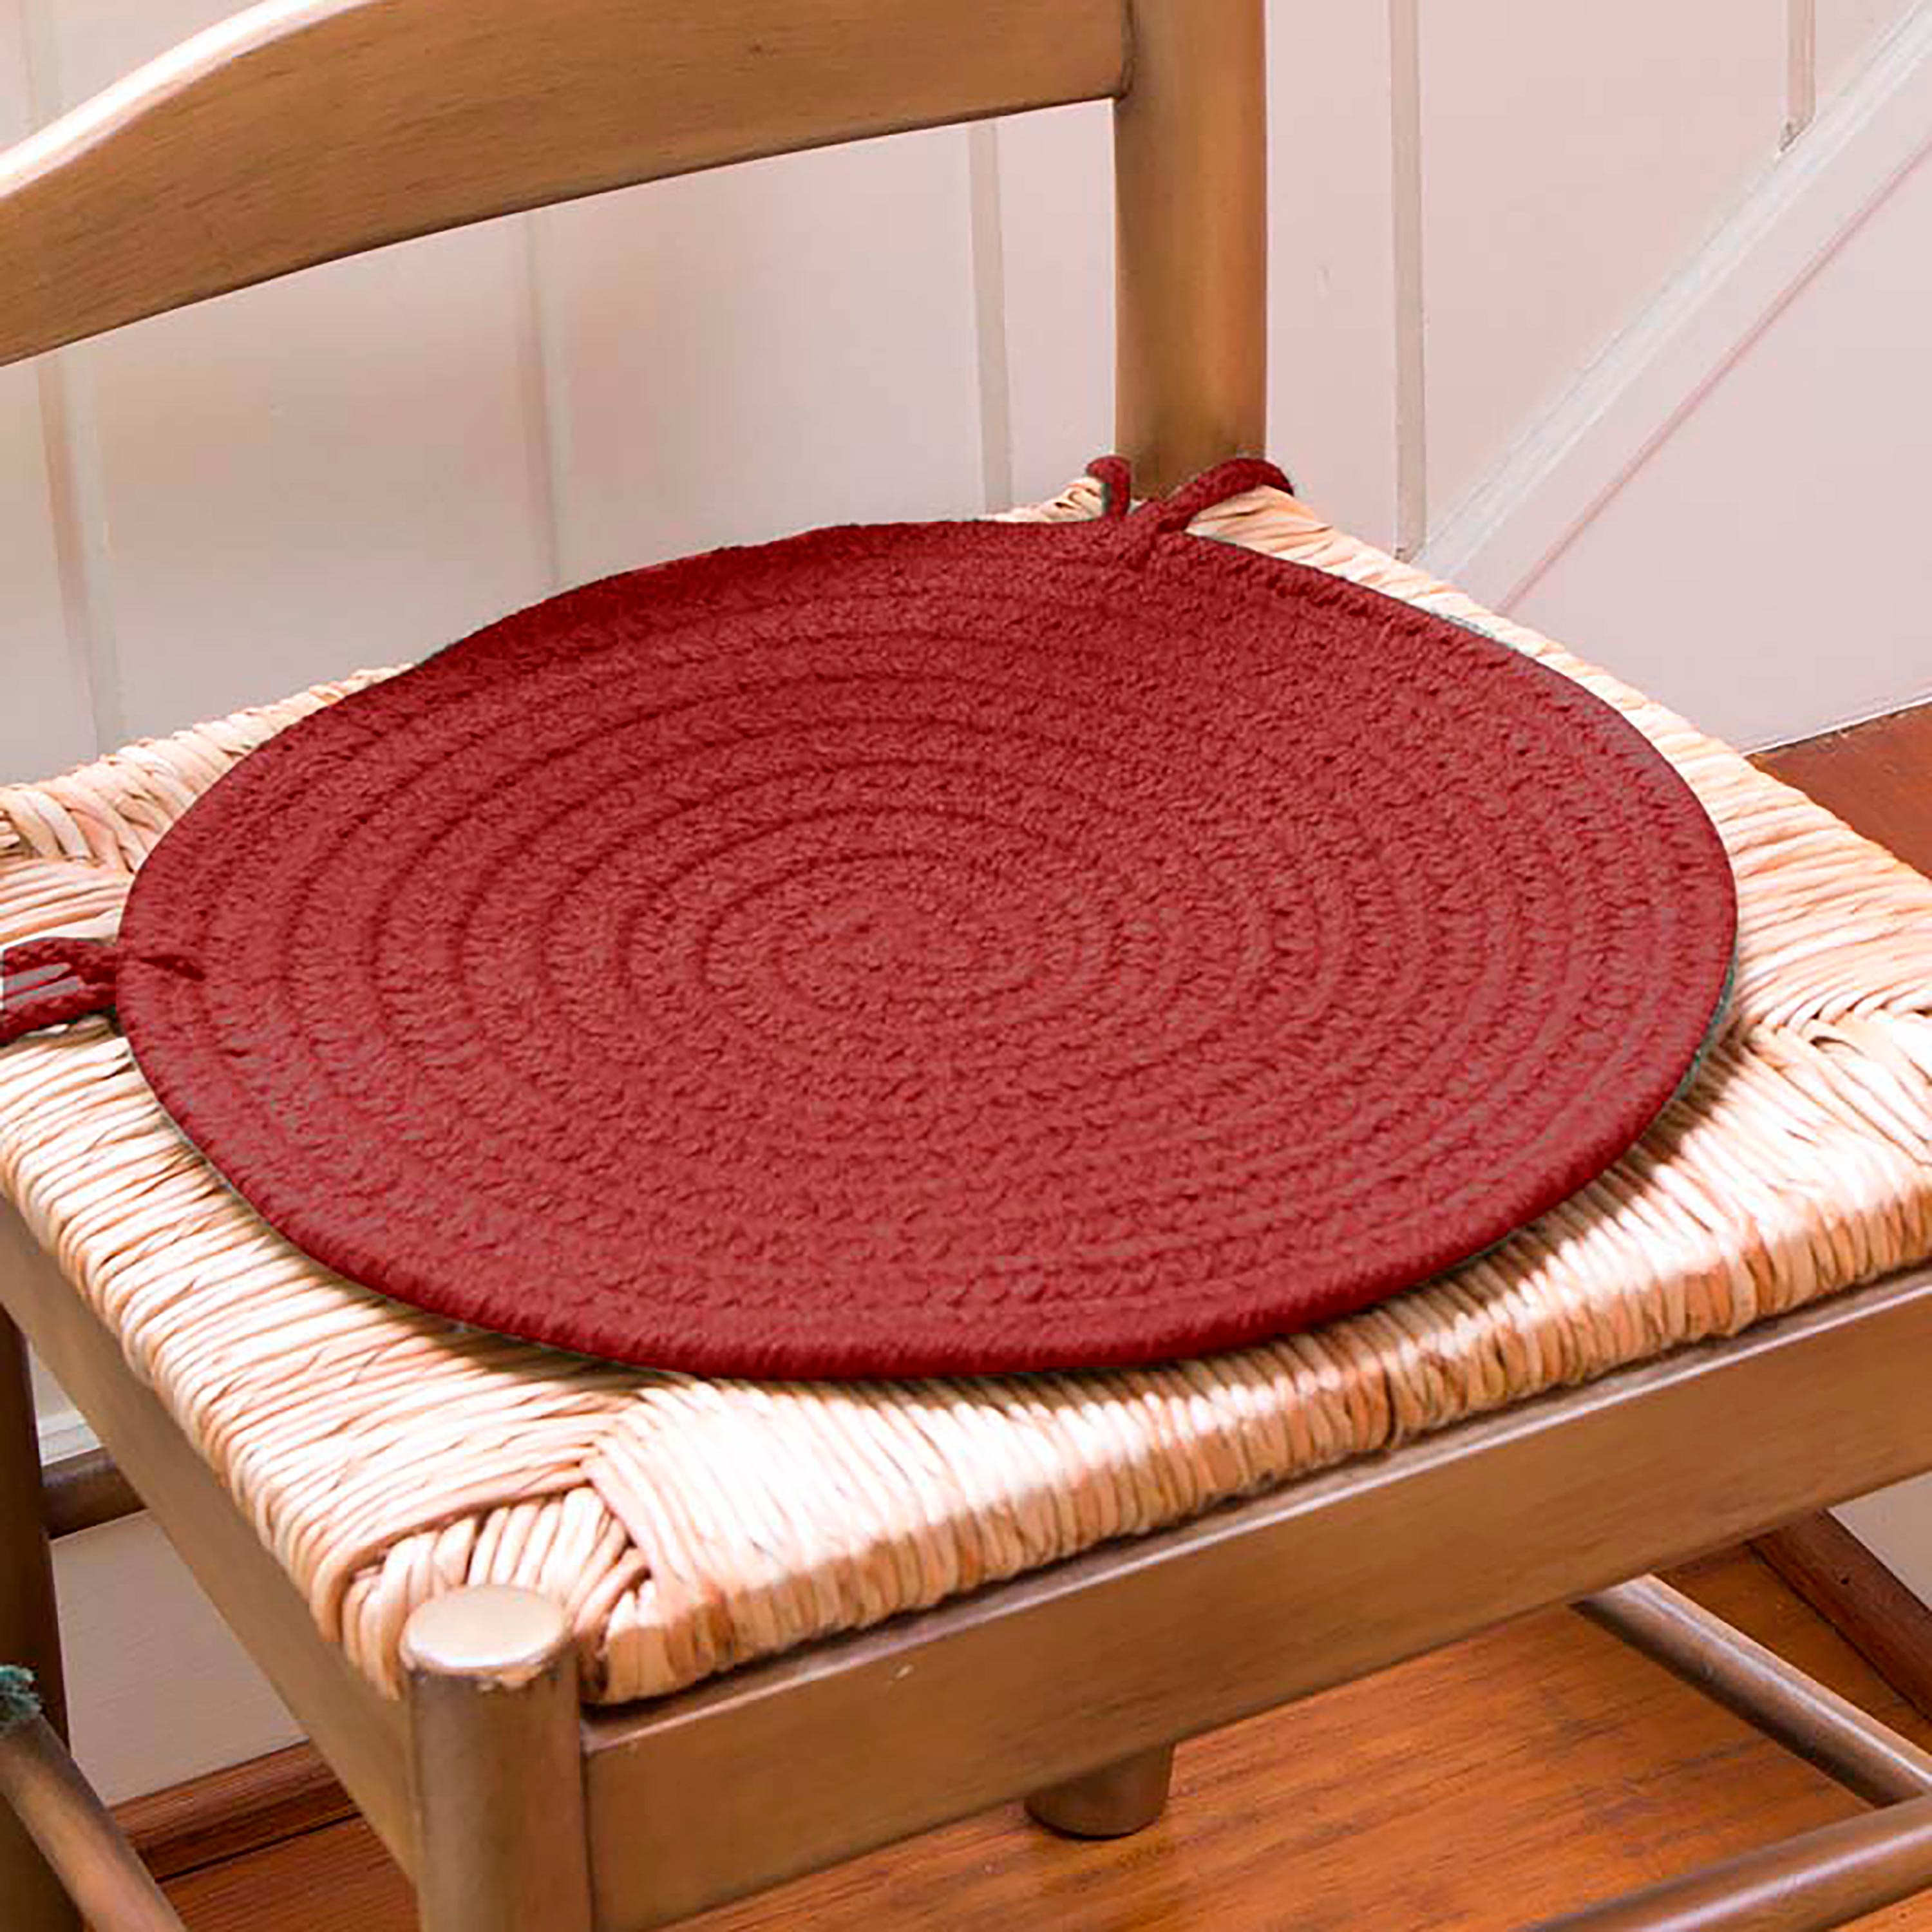 Image of 15" Dia. Color Country Classic Braided Polypro Chair Pad, in Burgundy